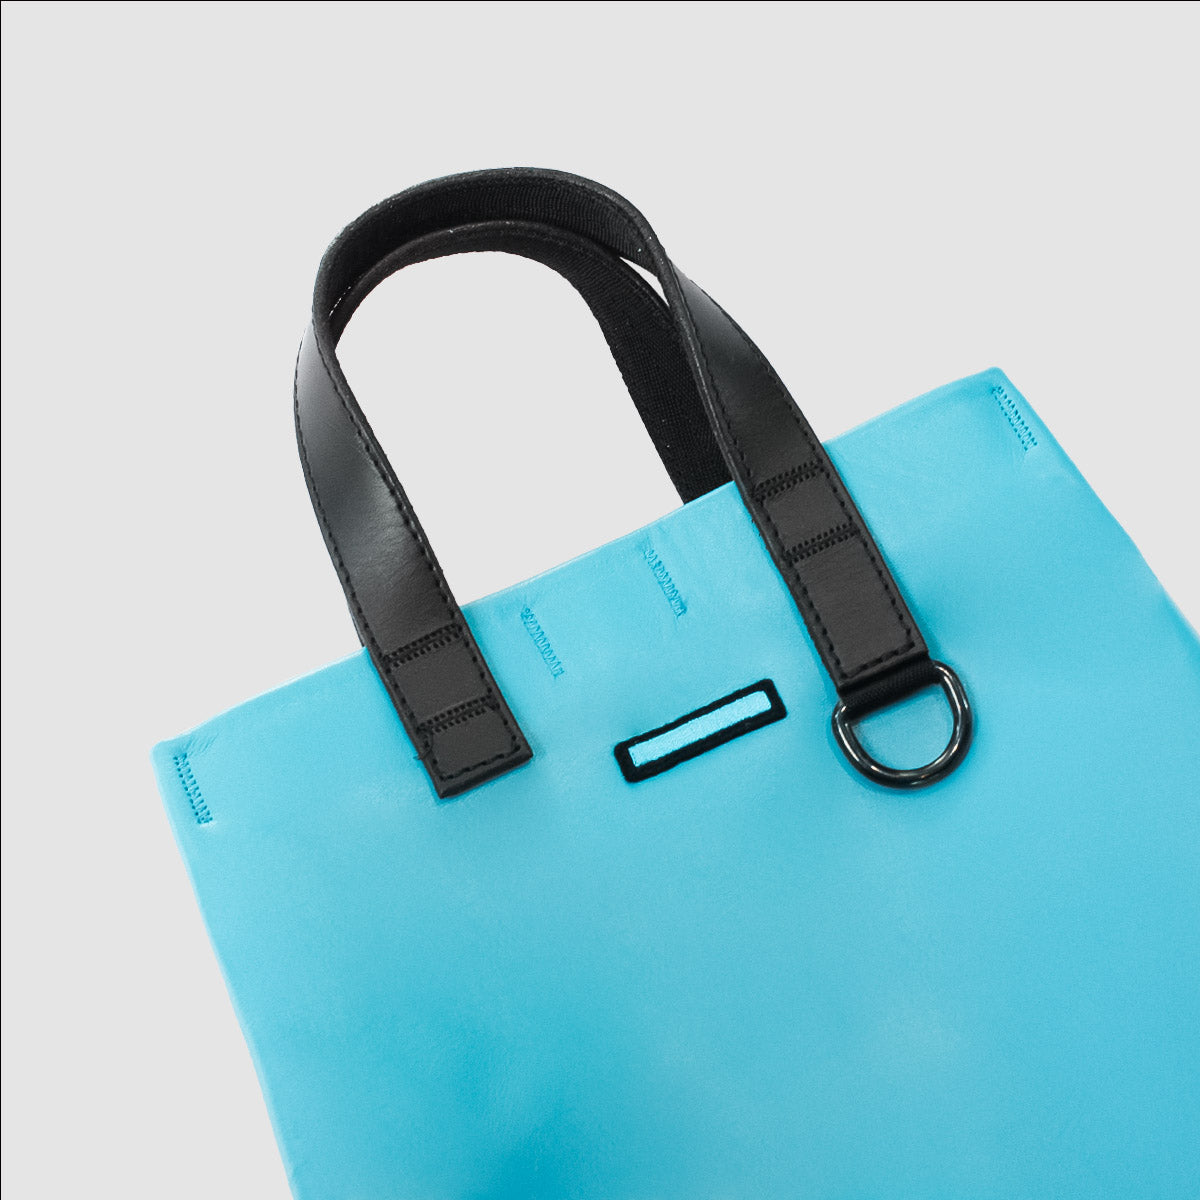 MUZE TURQUOISE LABEL - LEATHER SHOULDER BAG  "Teddy"  (TURQUOISE) ミューズ レザー ショルダーバッグ "テディ” ターコイズ